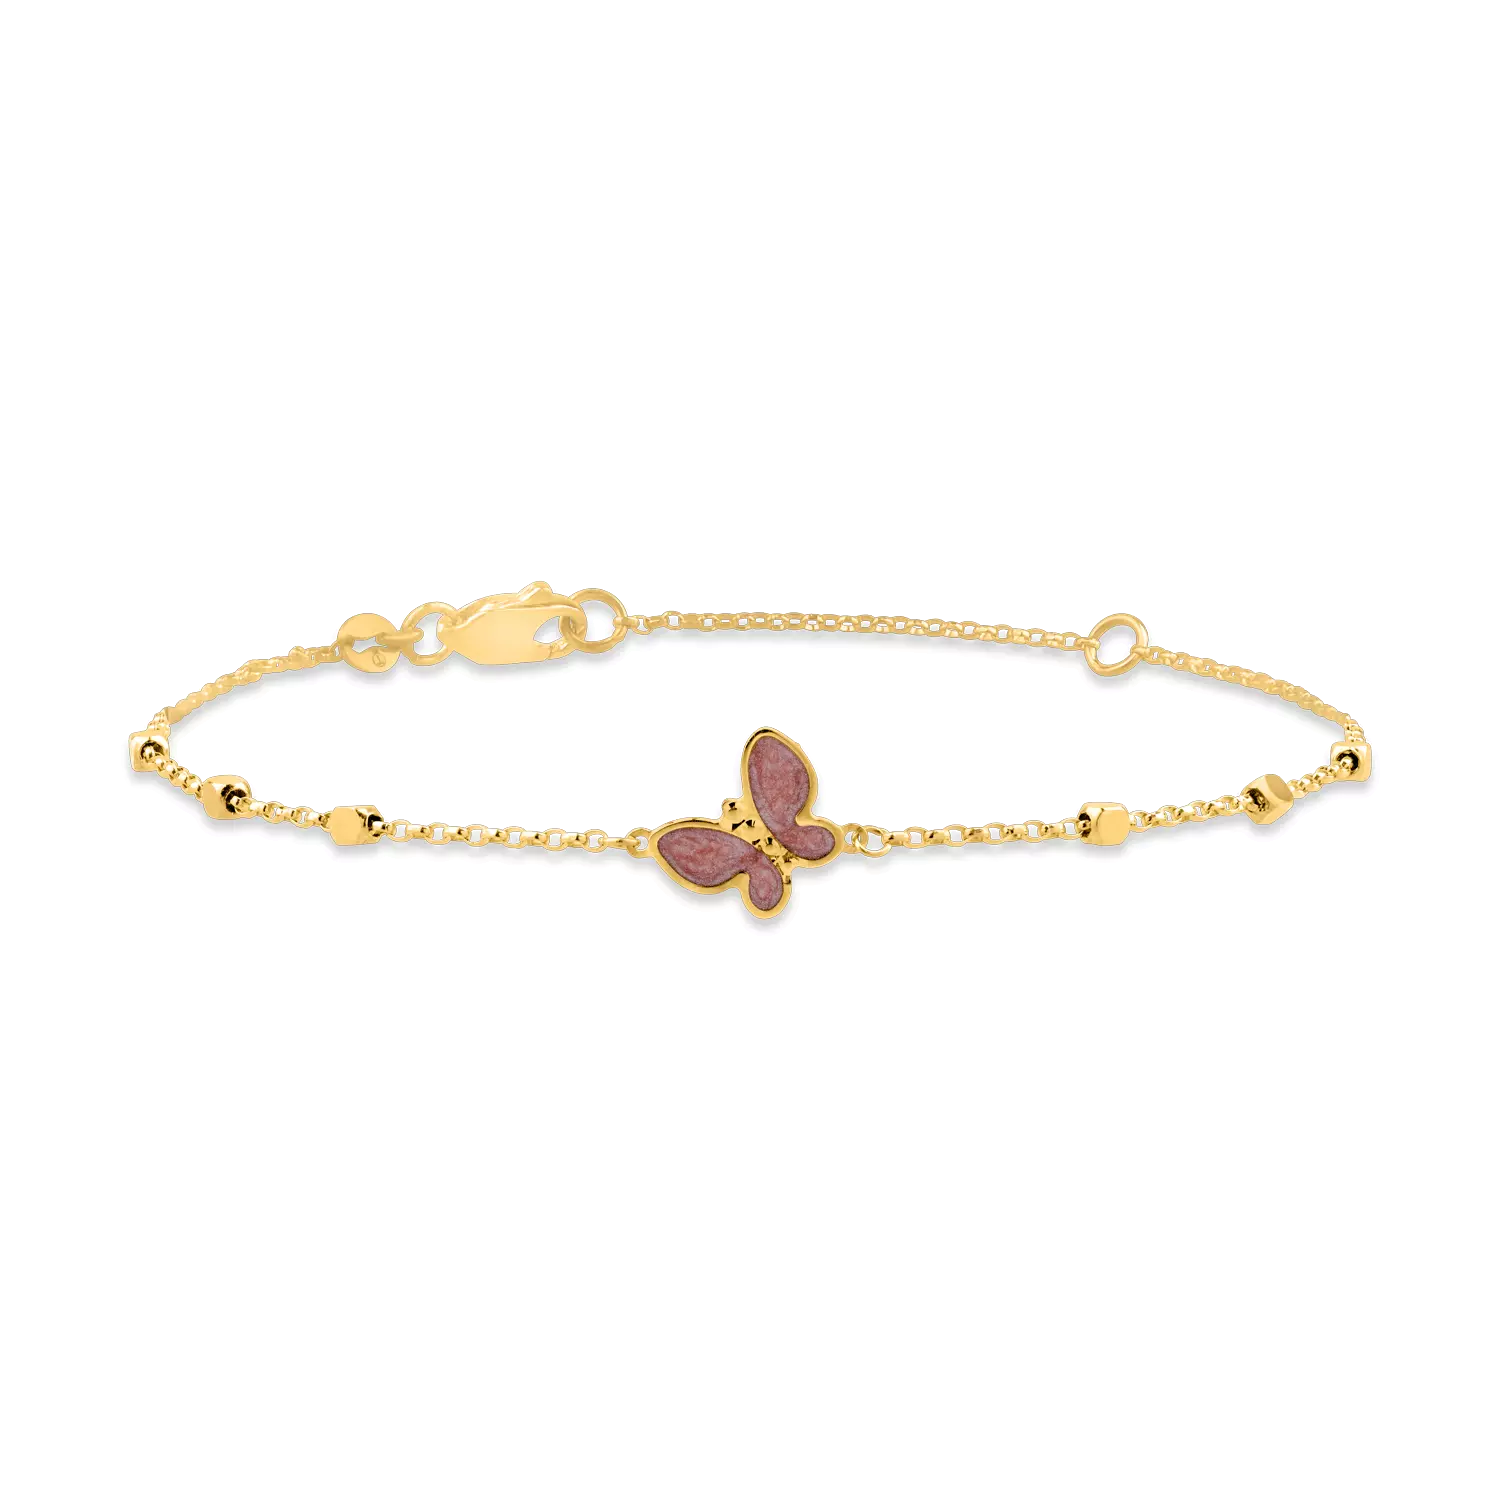 Yellow gold bracelet with beads and butterfly pendant